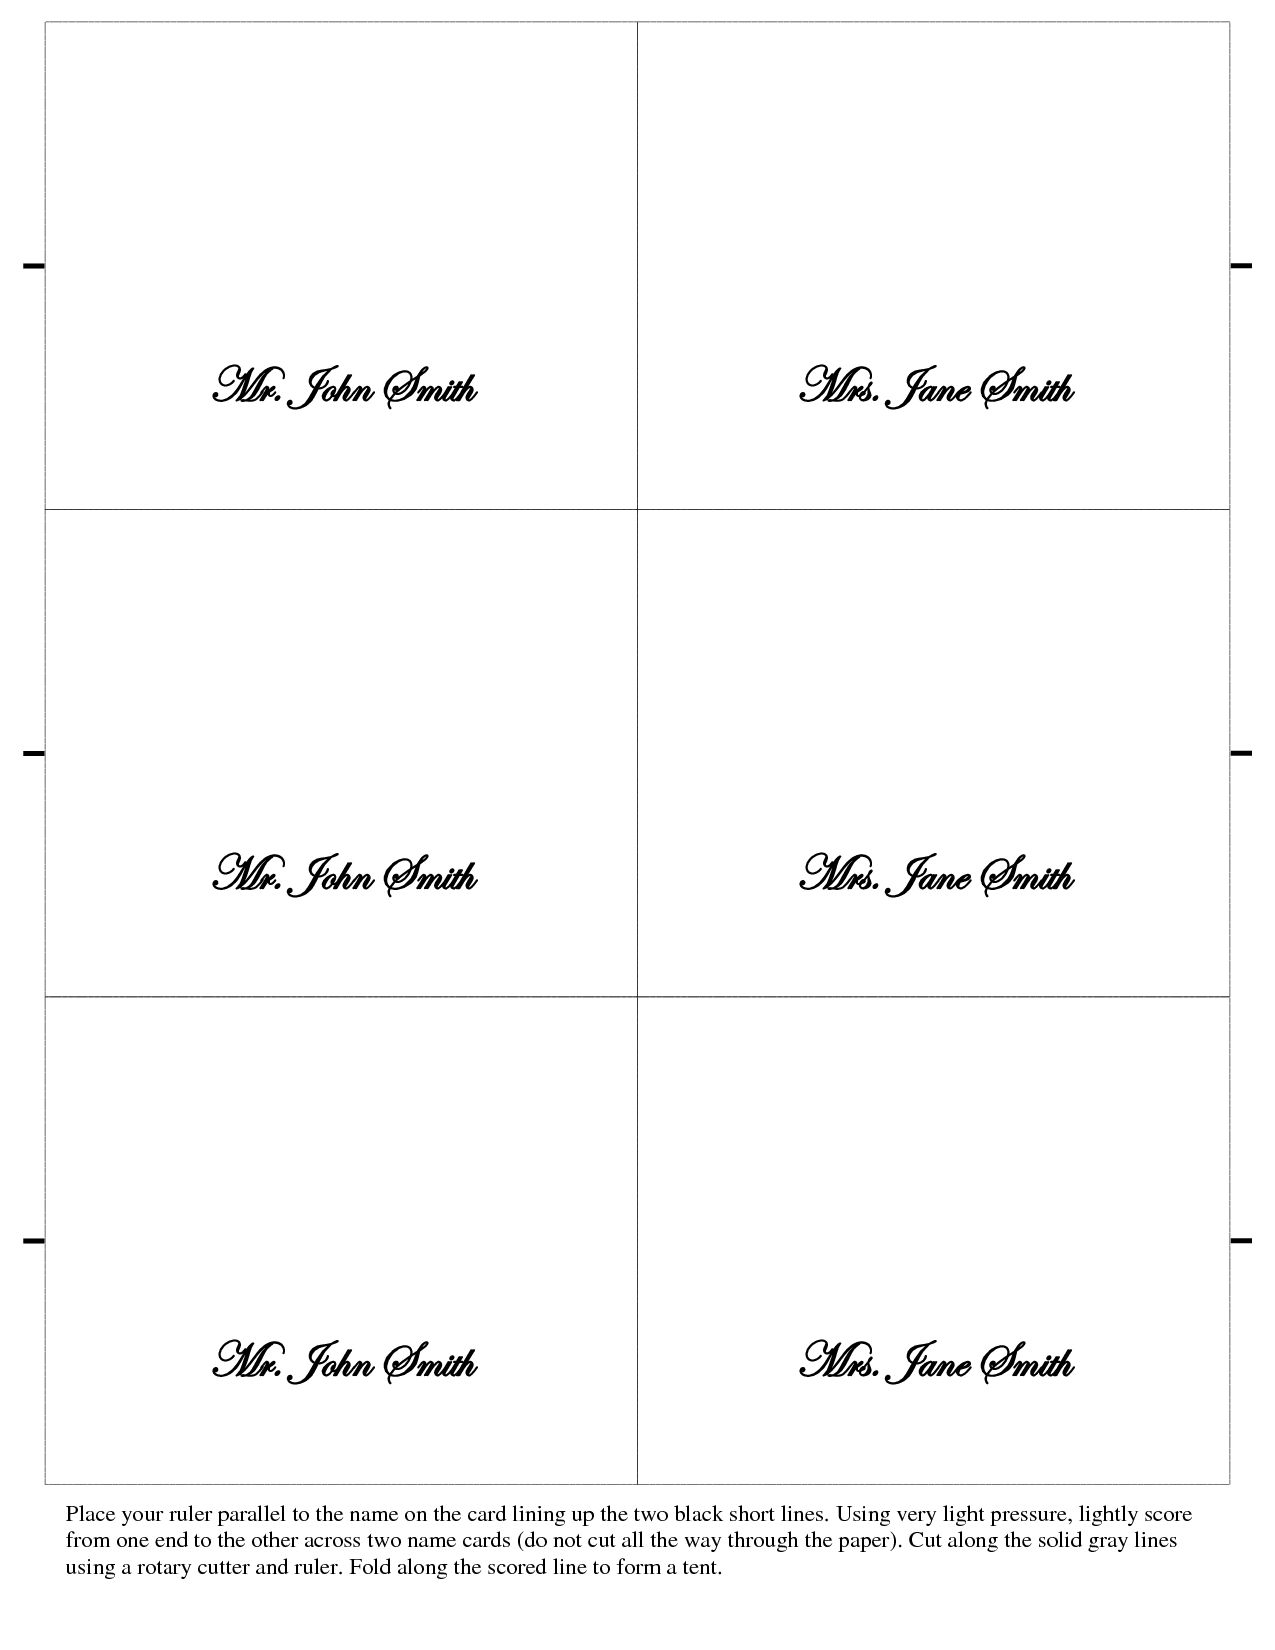 Name Badge Template 6 Per Sheet | Glendale Community Inside Free Template For Place Cards 6 Per Sheet